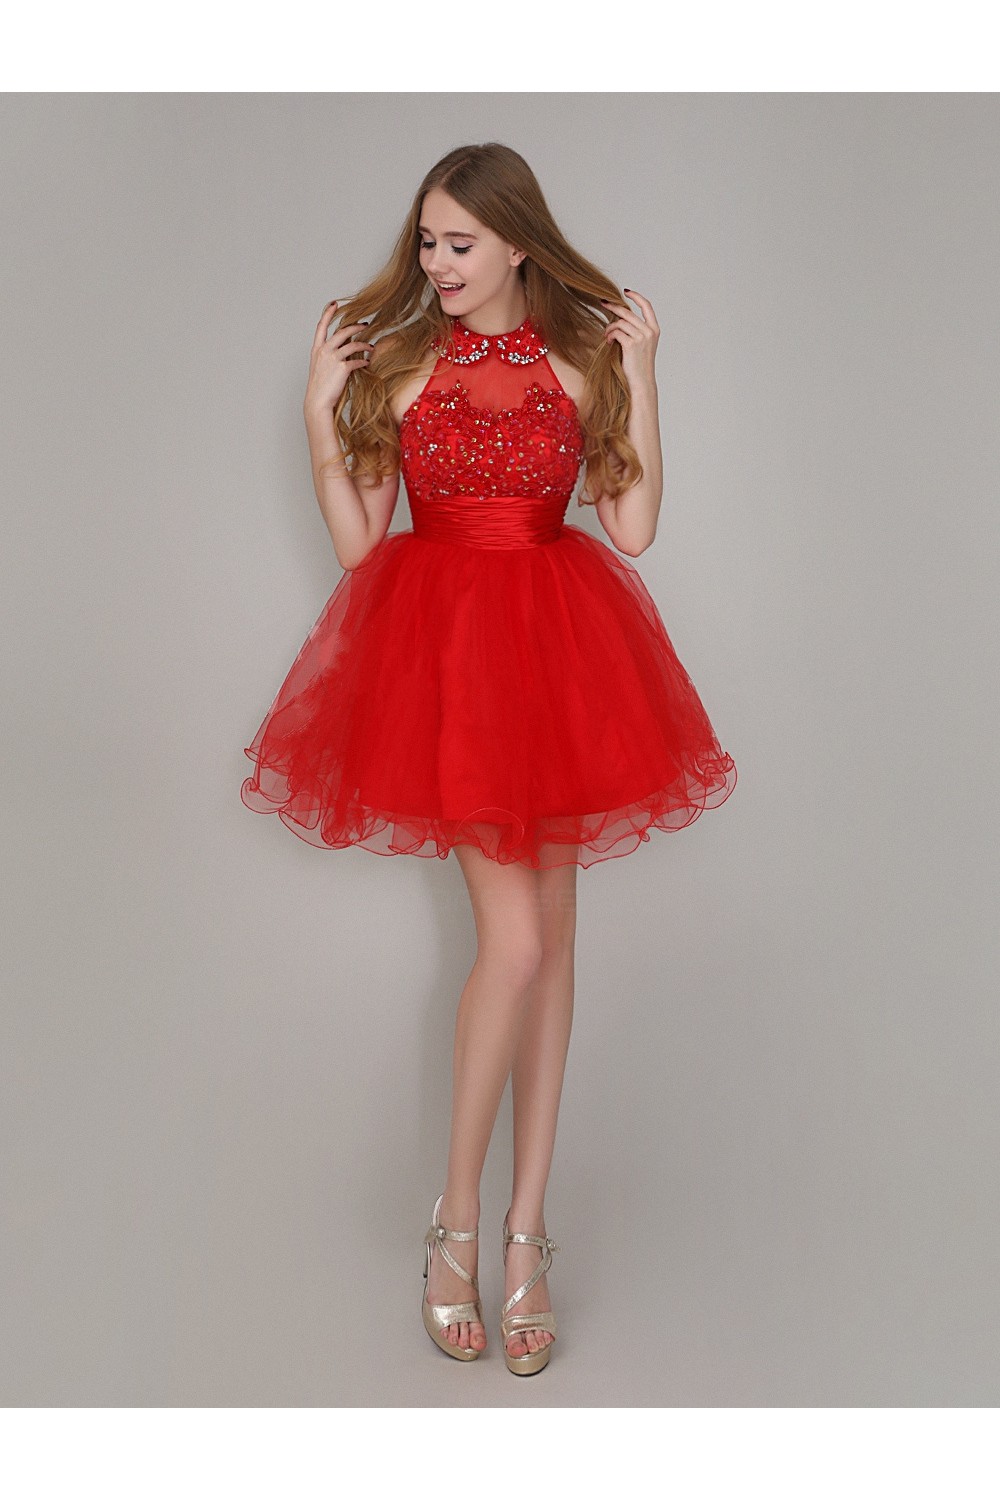 Shortmini Red Beaded Prom Evening Formal Party Dresses Ed010712